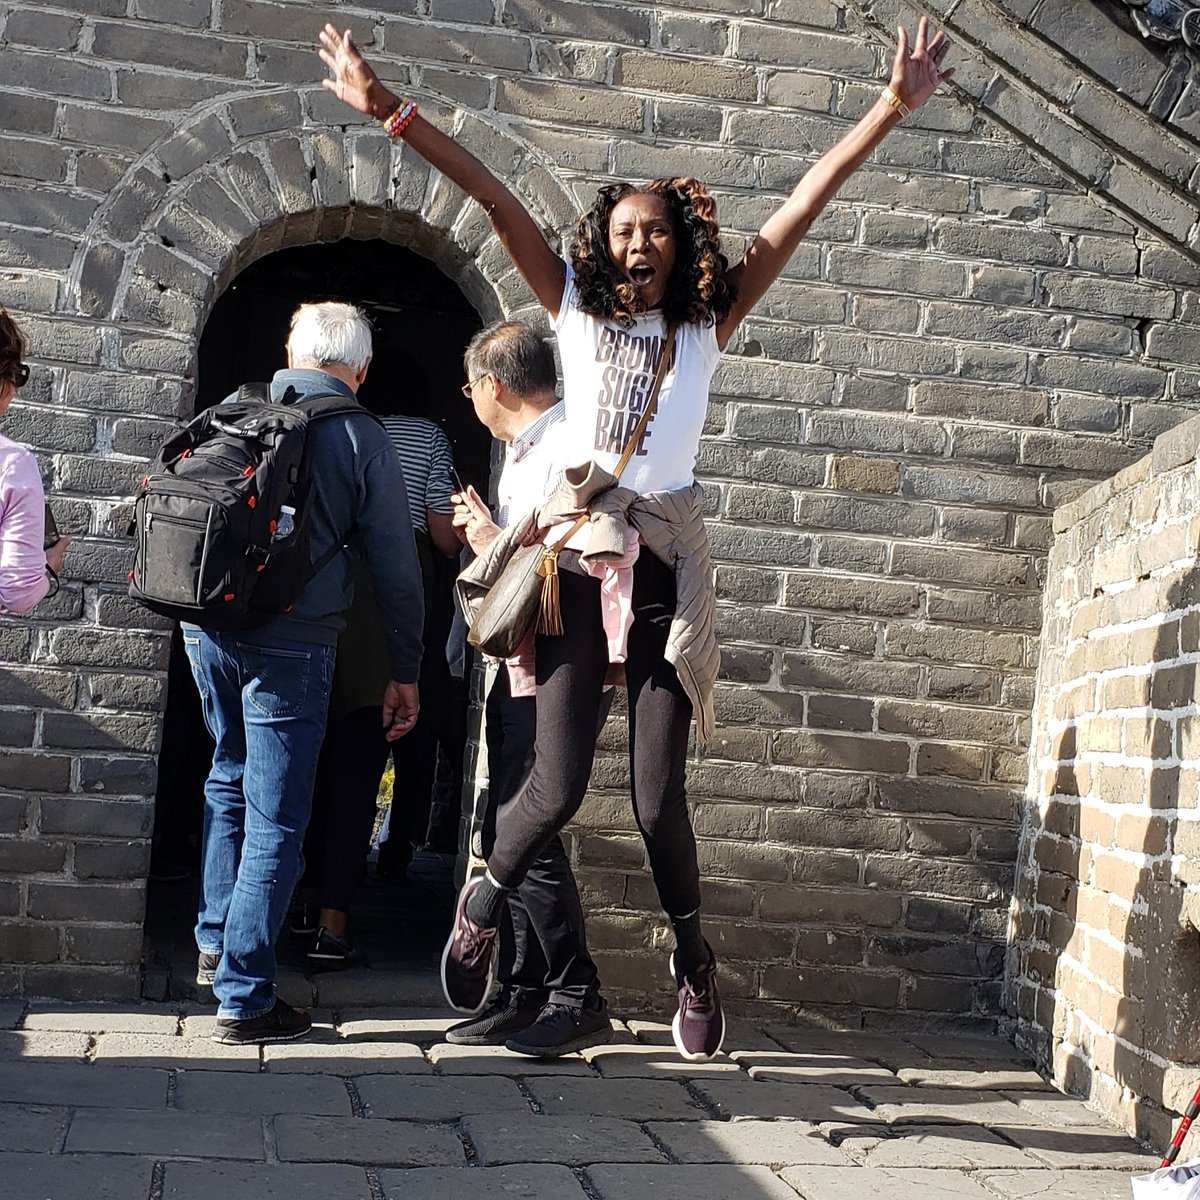 The feeling you get when you have made it to the #Greatwallofchina #dreams #visions #reality #livelifenow #unoboobgirl #angelindisguise #blackinchina